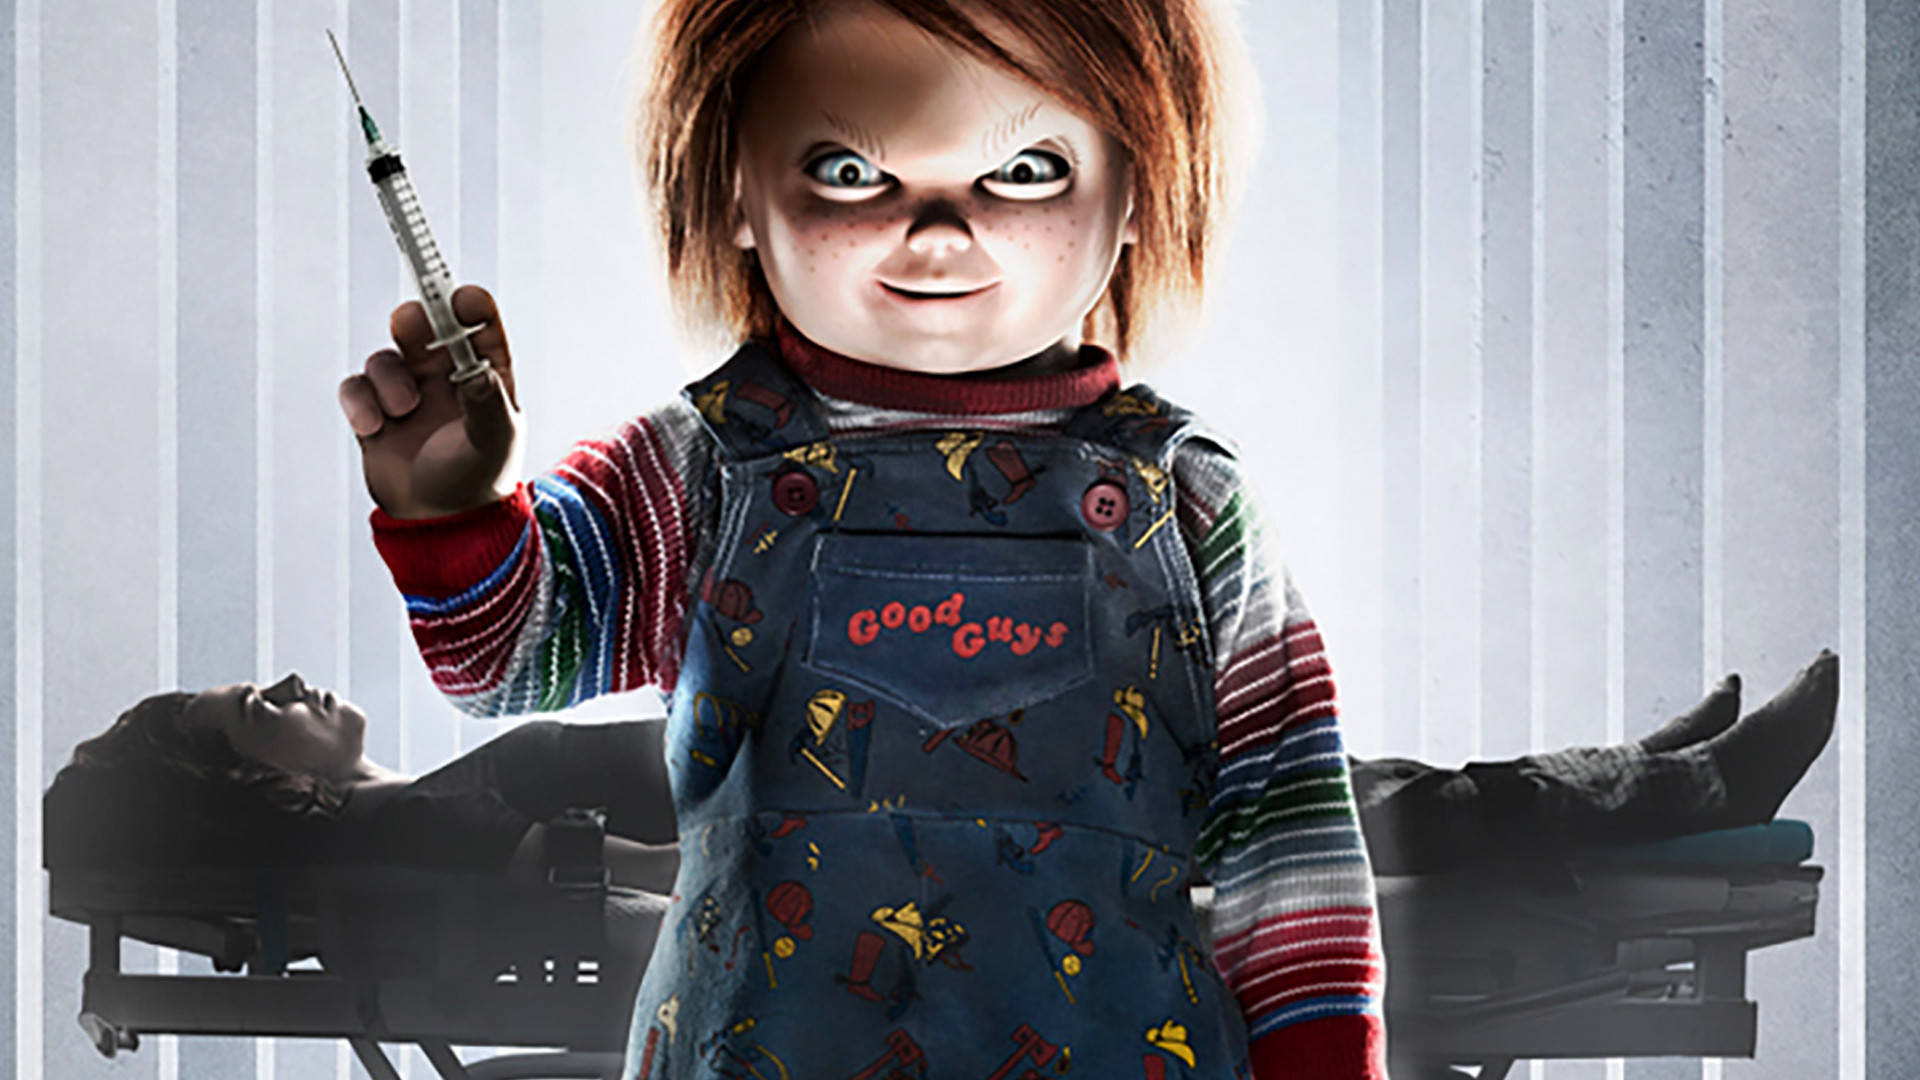 Child's Play Cult Of Chucky Background